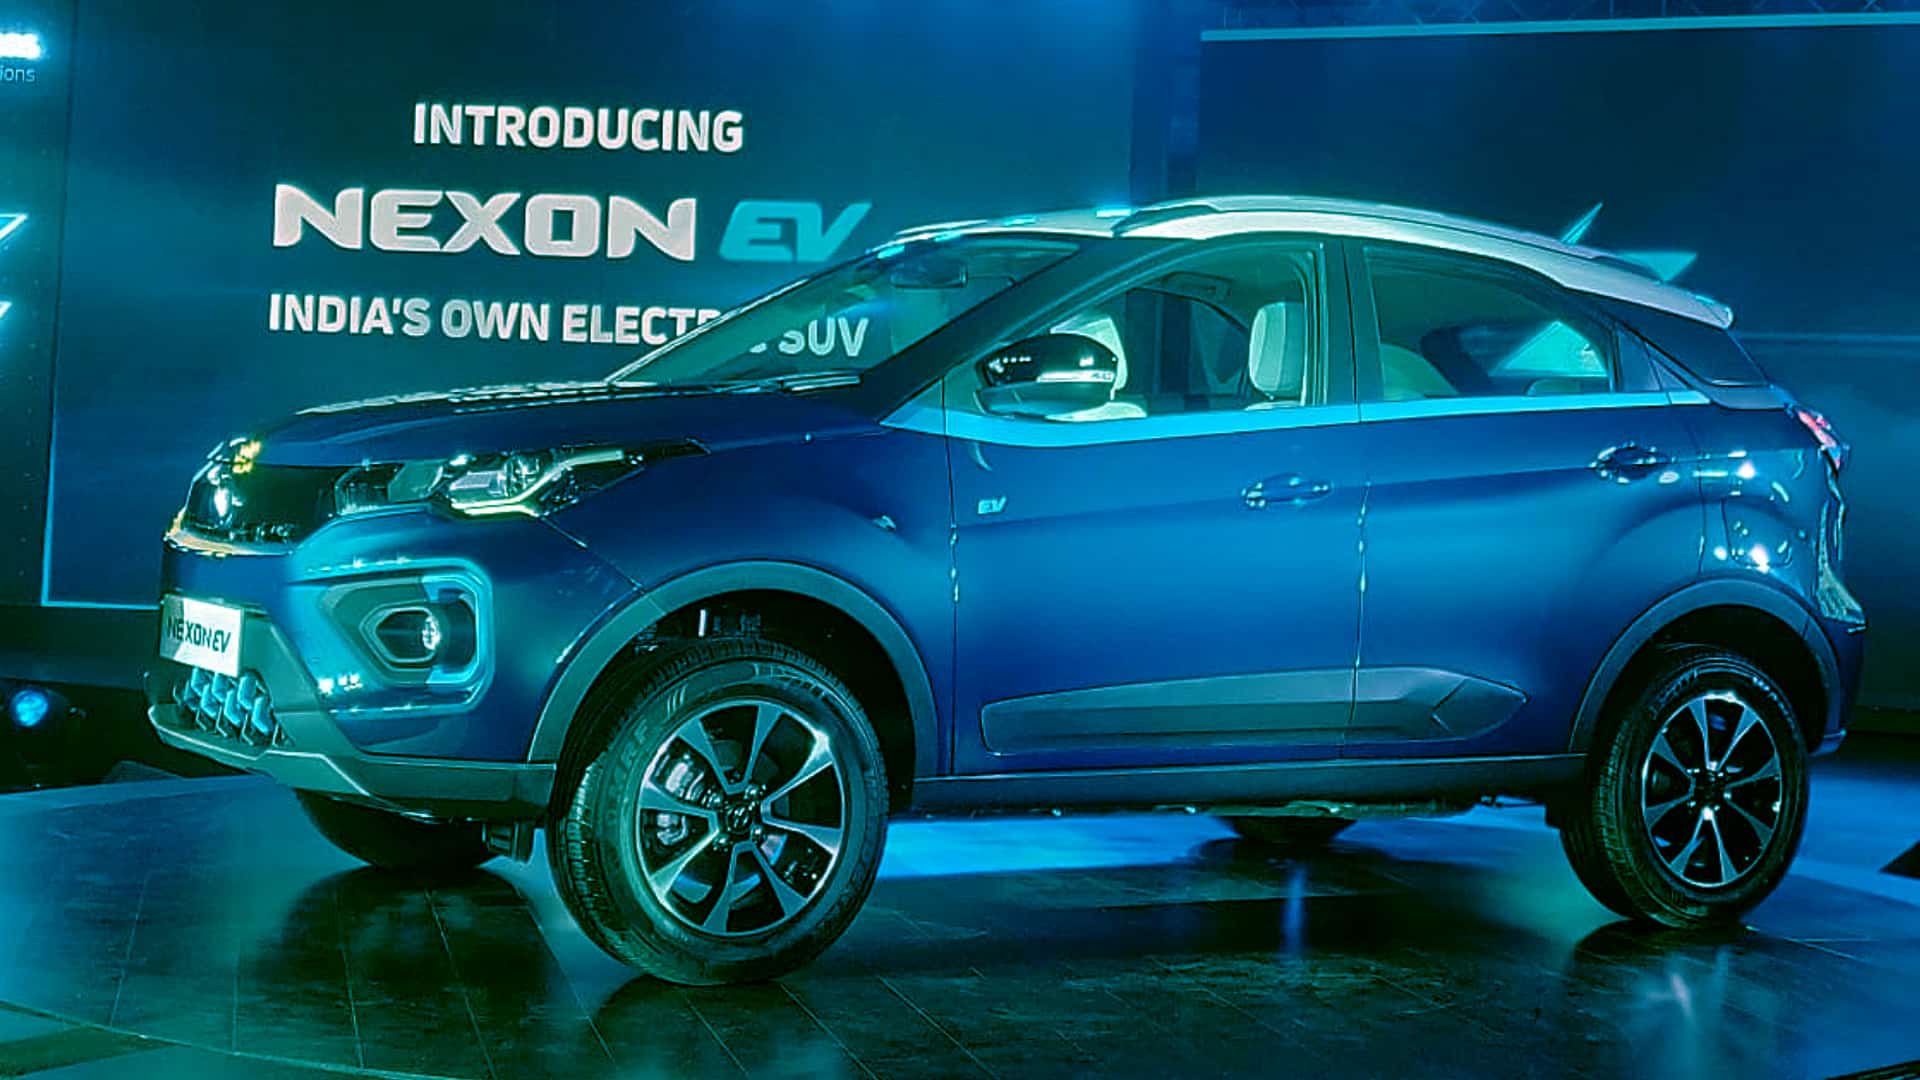 Delhi govt suspends subsidy on Tata Nexon EV, panel to look into complaints: Company says will work to protect customers' interests